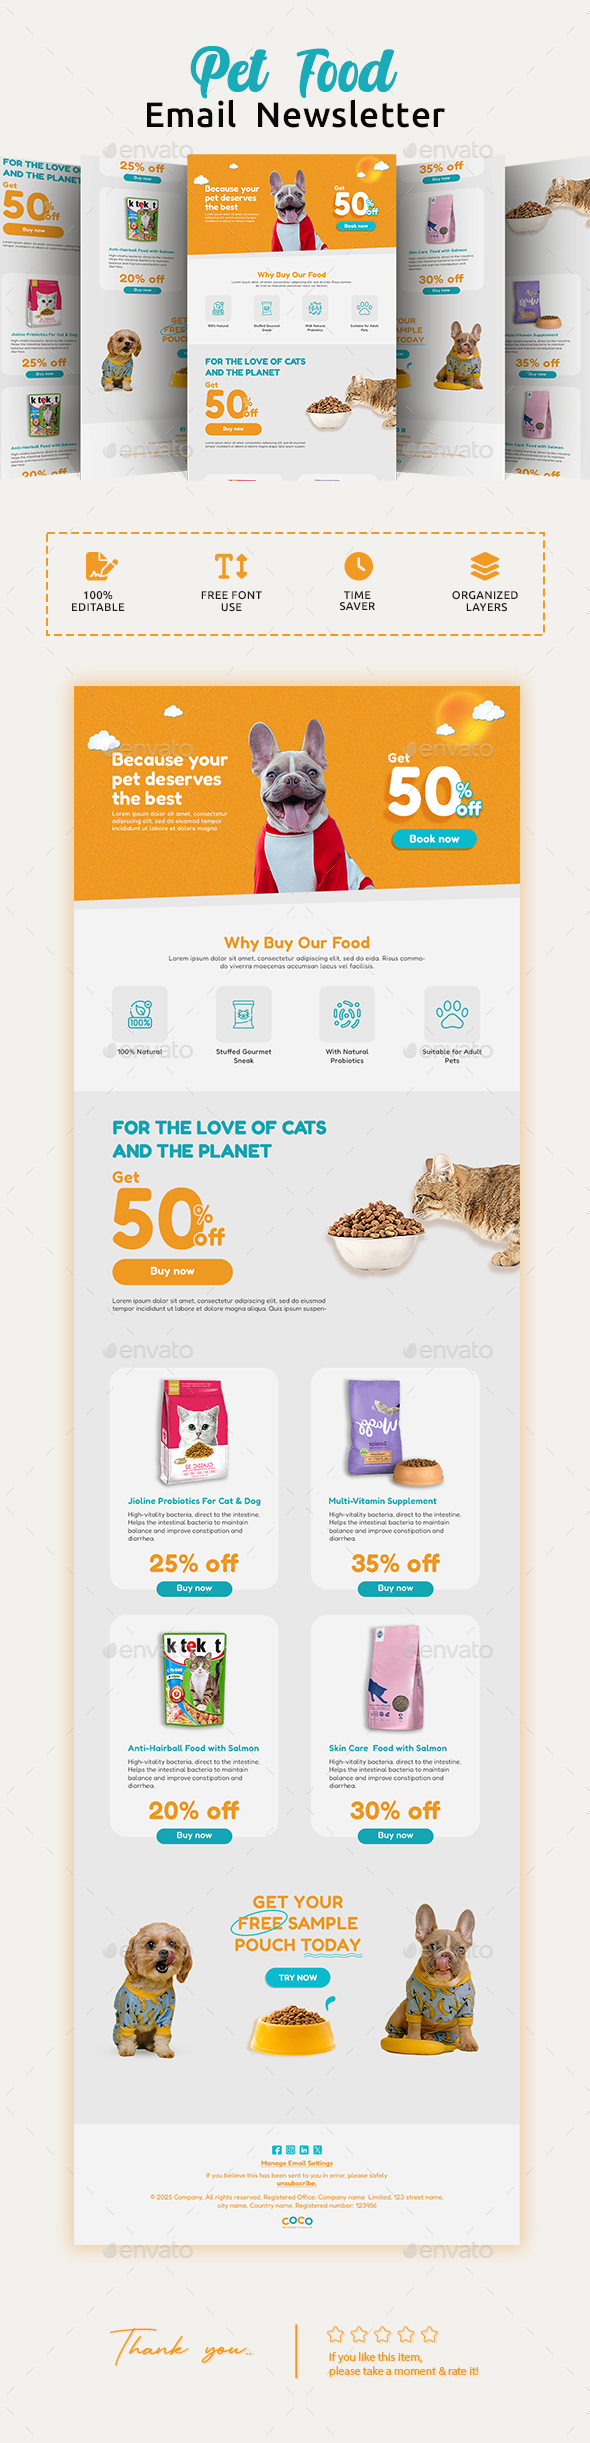 [DOWNLOAD]Pet Food Email Newsletter PSD Template.